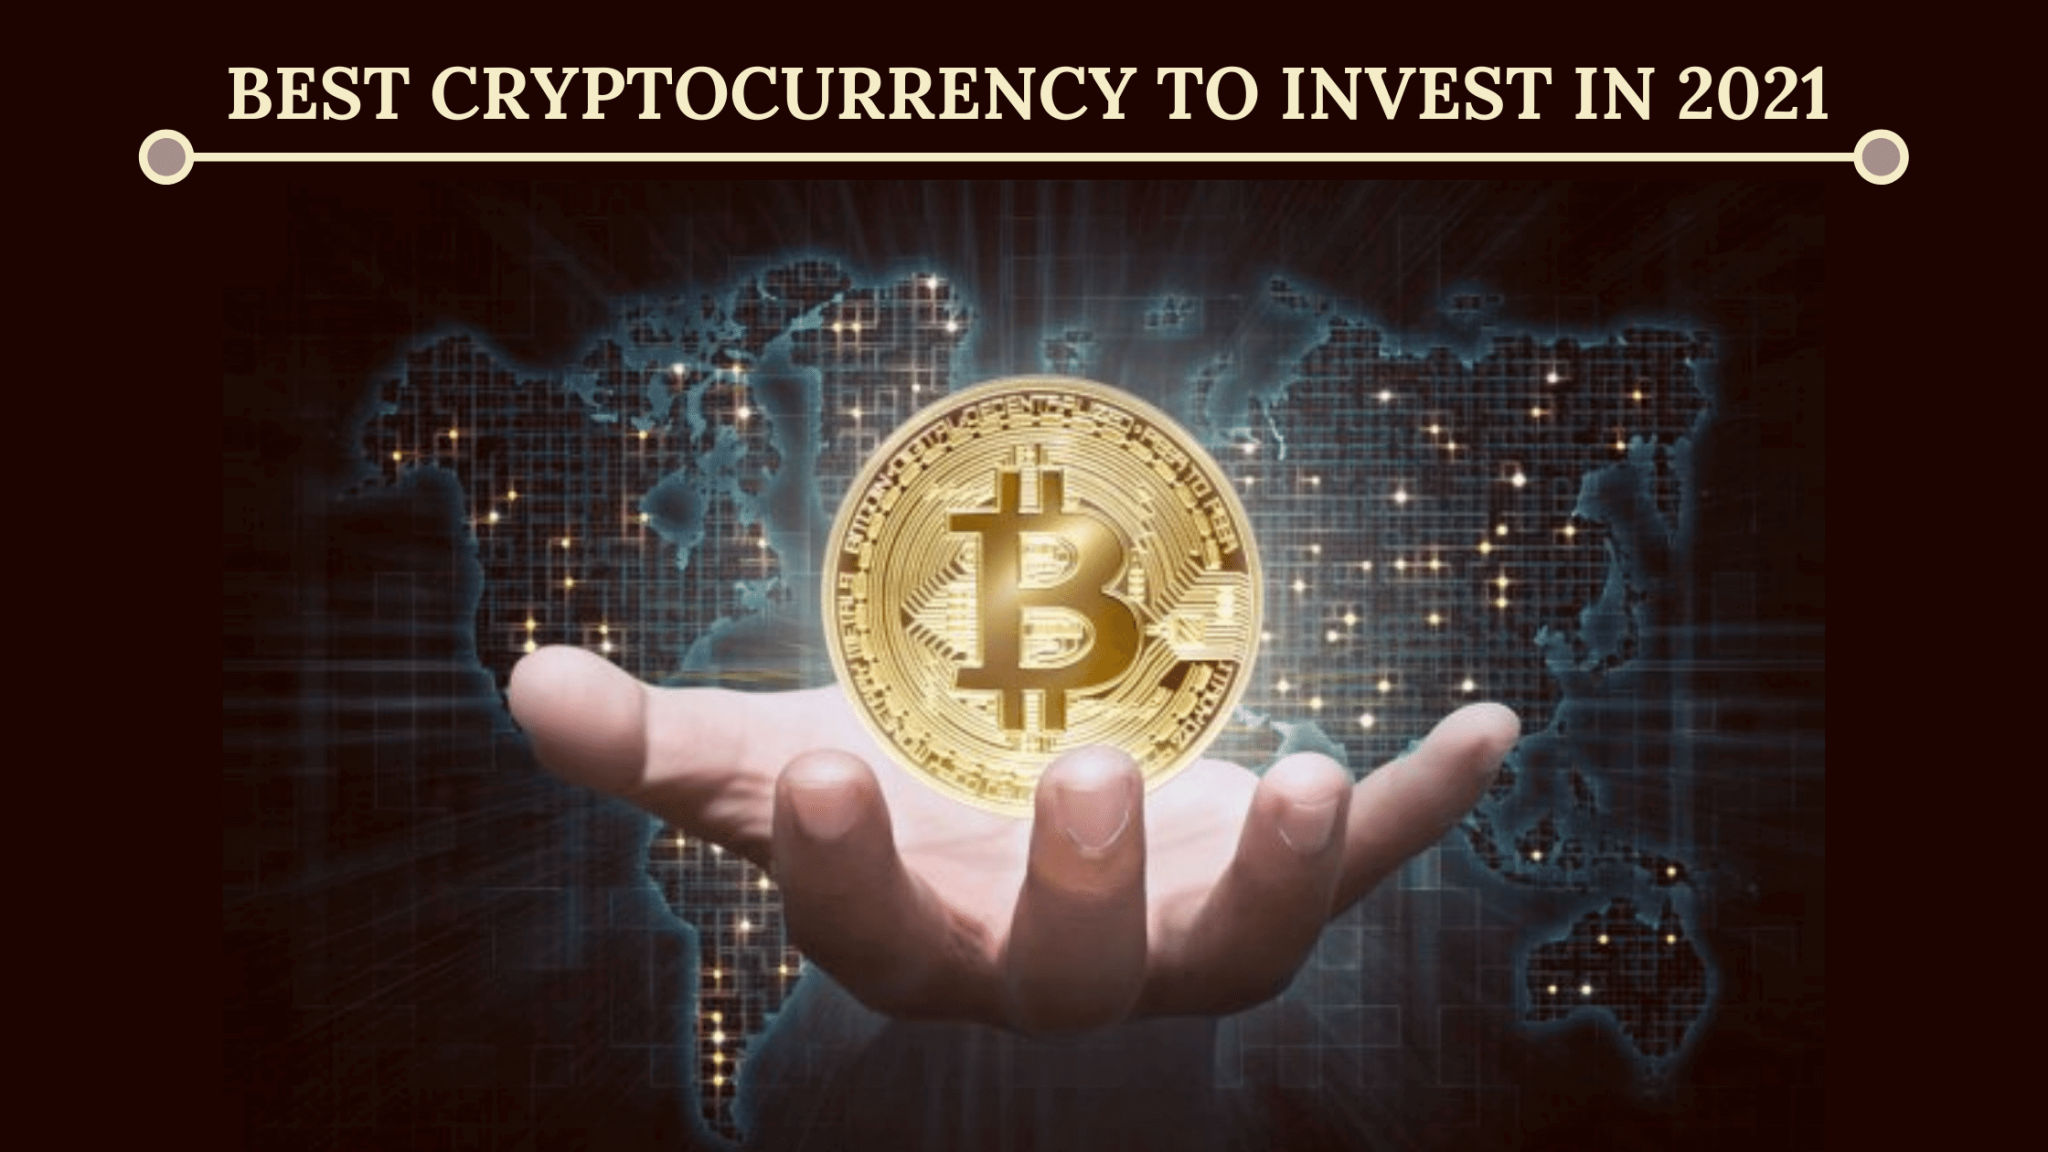 Best Cryptocurrency to Invest in 2021 for Long-Term